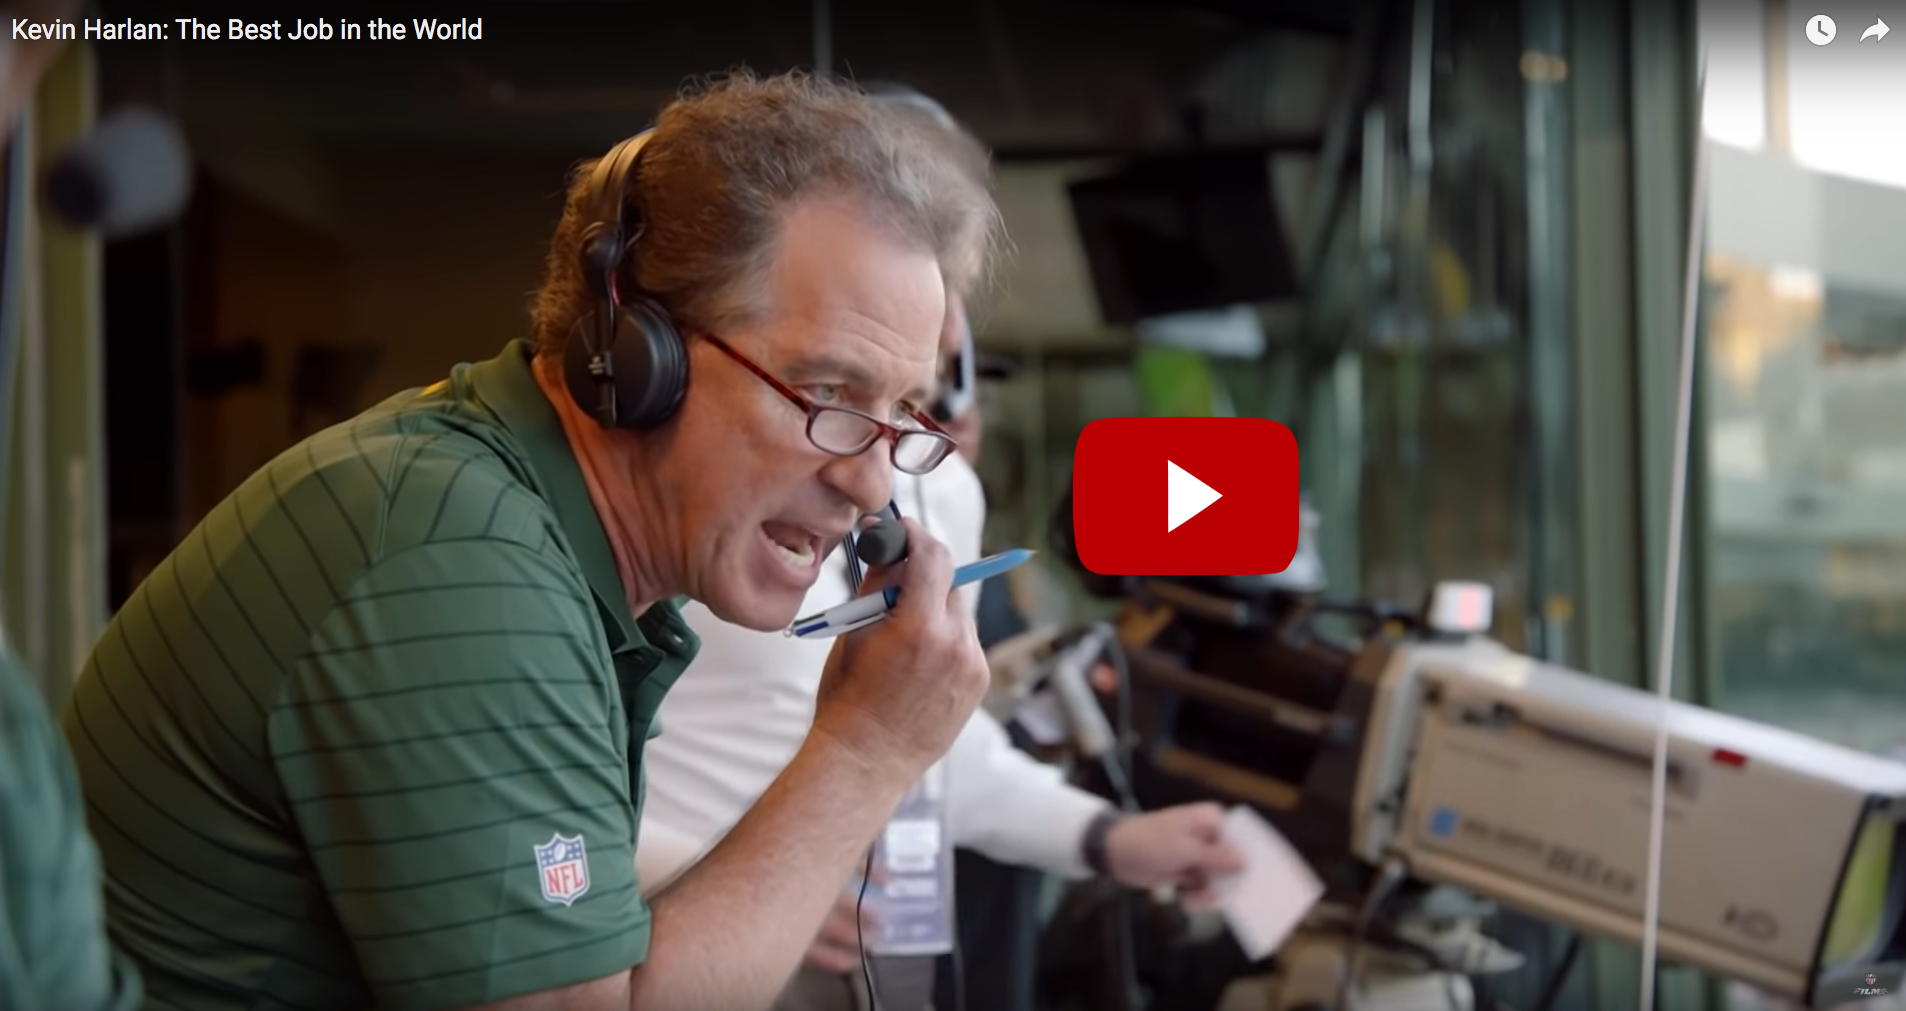 NFL Films story on sportscaster Kevin Harlan with sound recorded by sound mixer Larry Kaltenbach